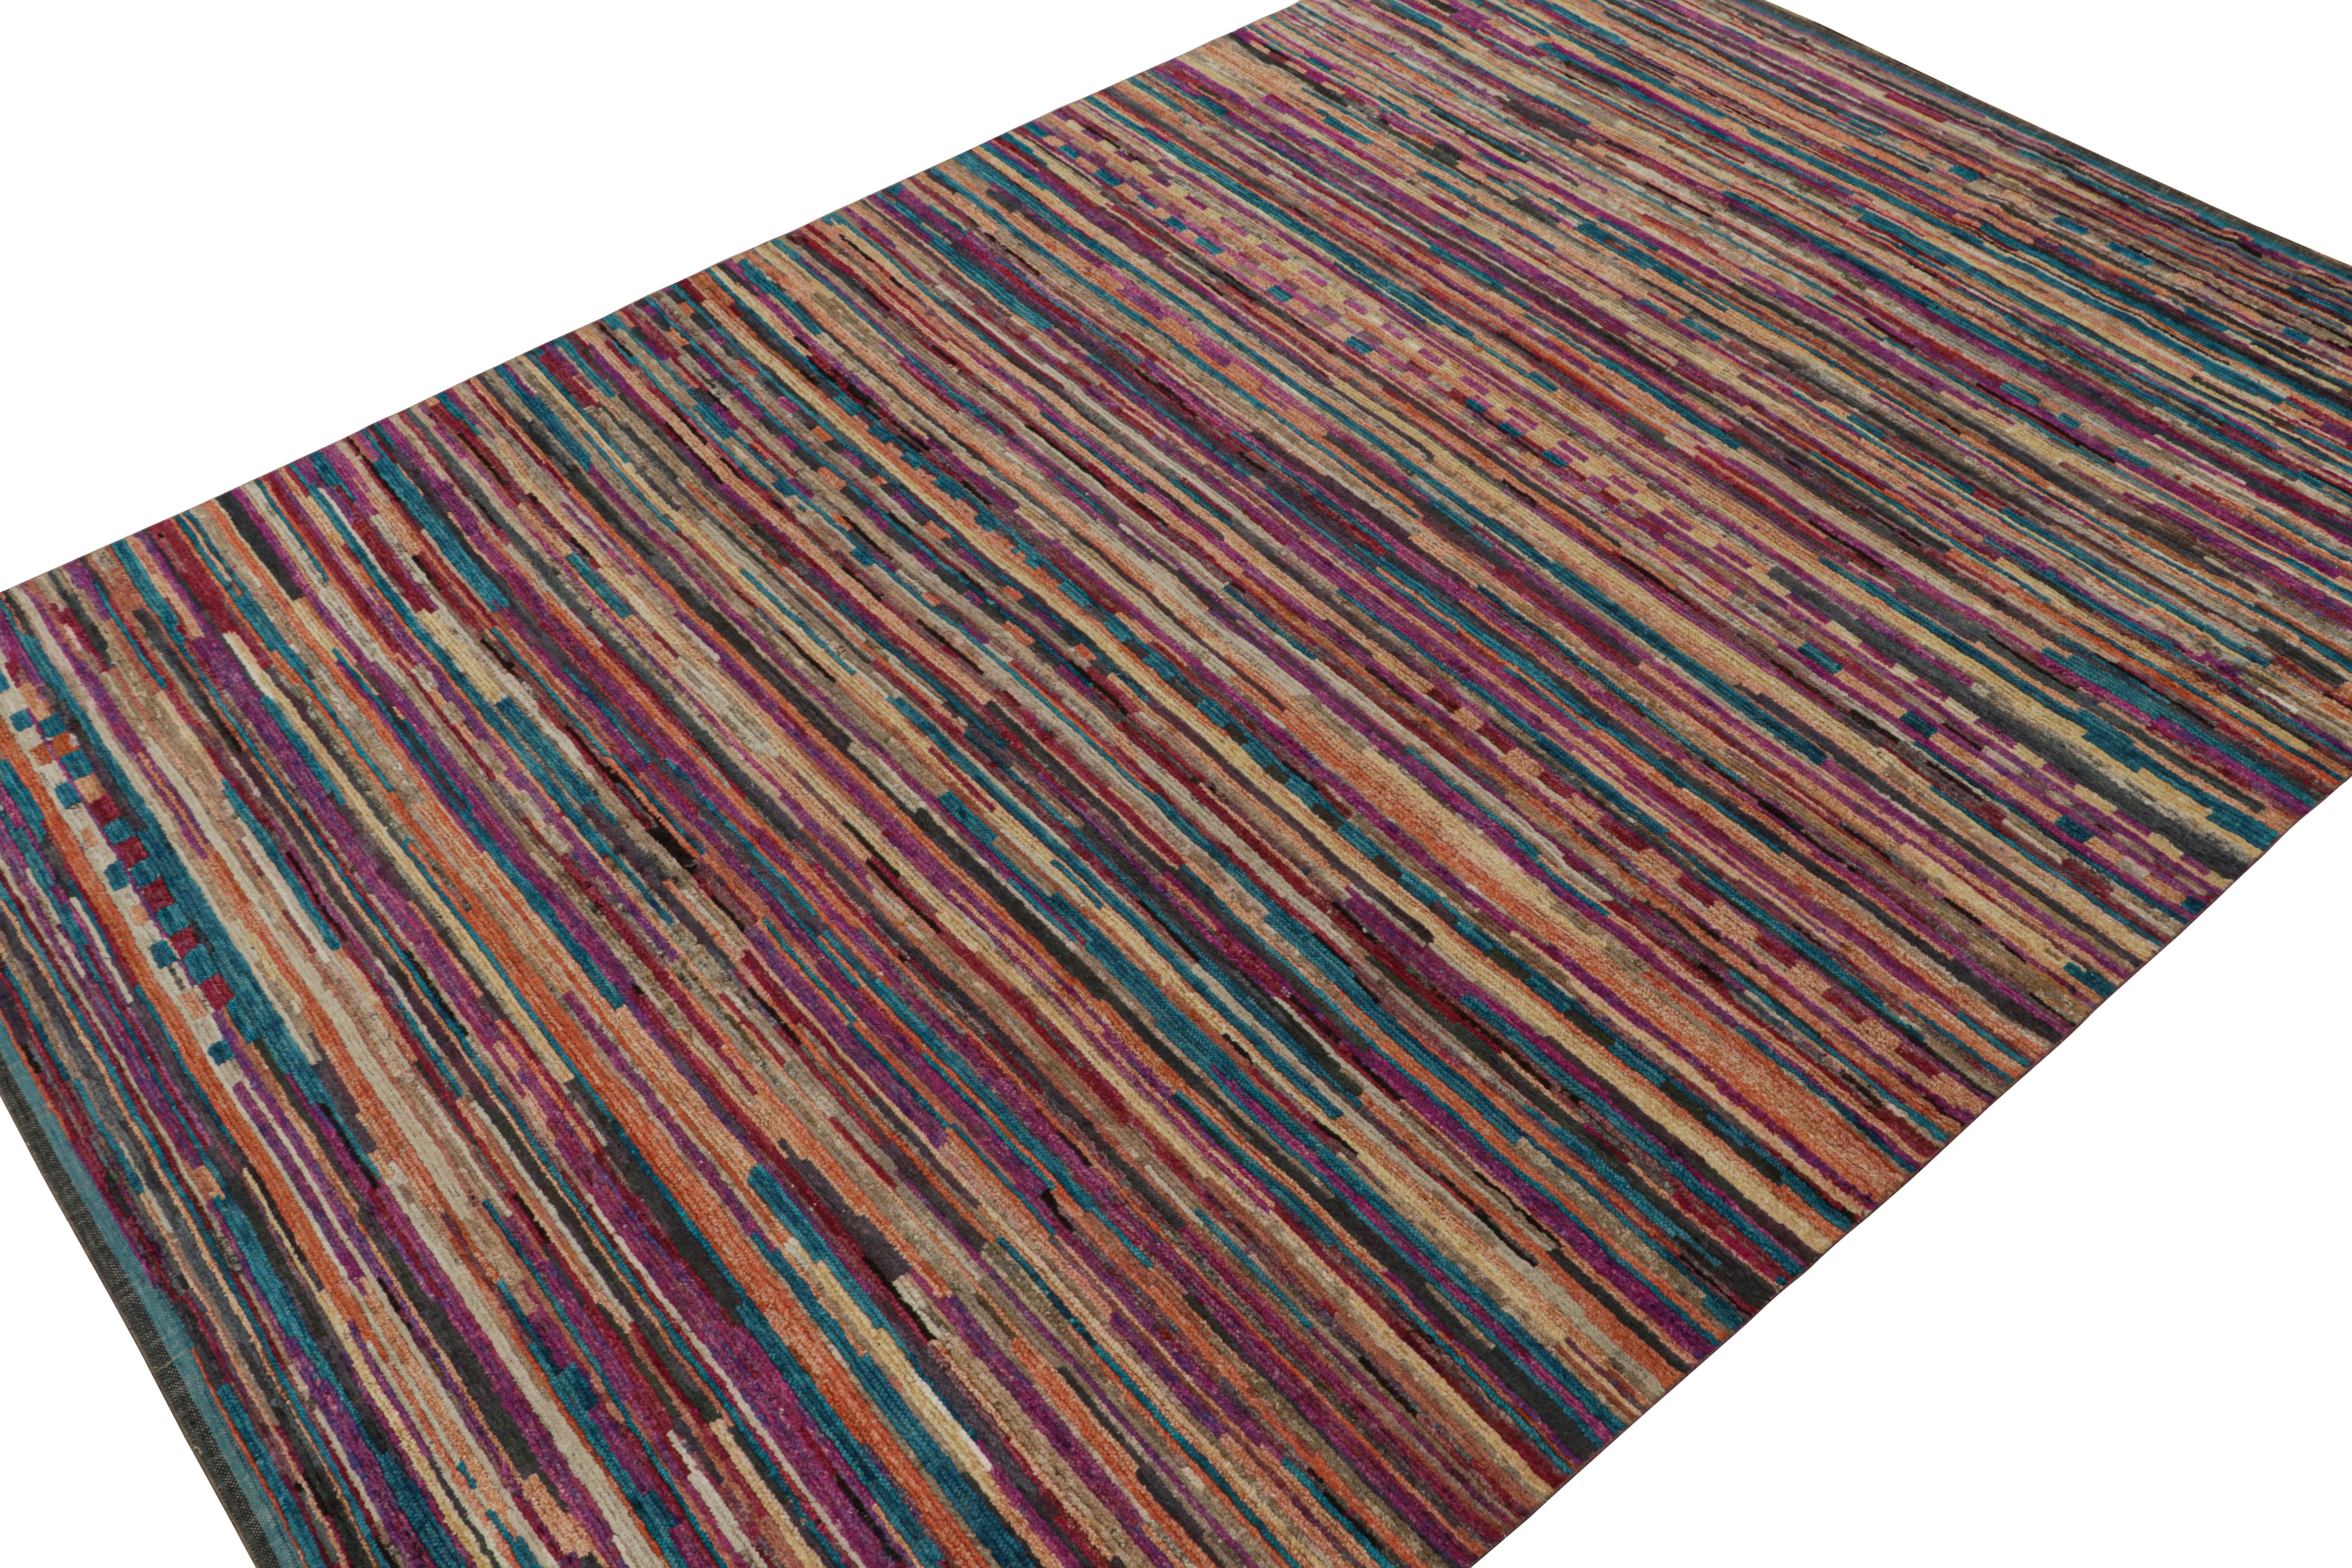 Hand-knotted in wool & silk, this 10x14 rug is a new addition to the Moroccan Collection by Rug & Kilim.

On the Design: 

Keen eyes will admire the sheer variety of colors, and the fabulous sense of movement and subtle patterns within. Connoisseurs